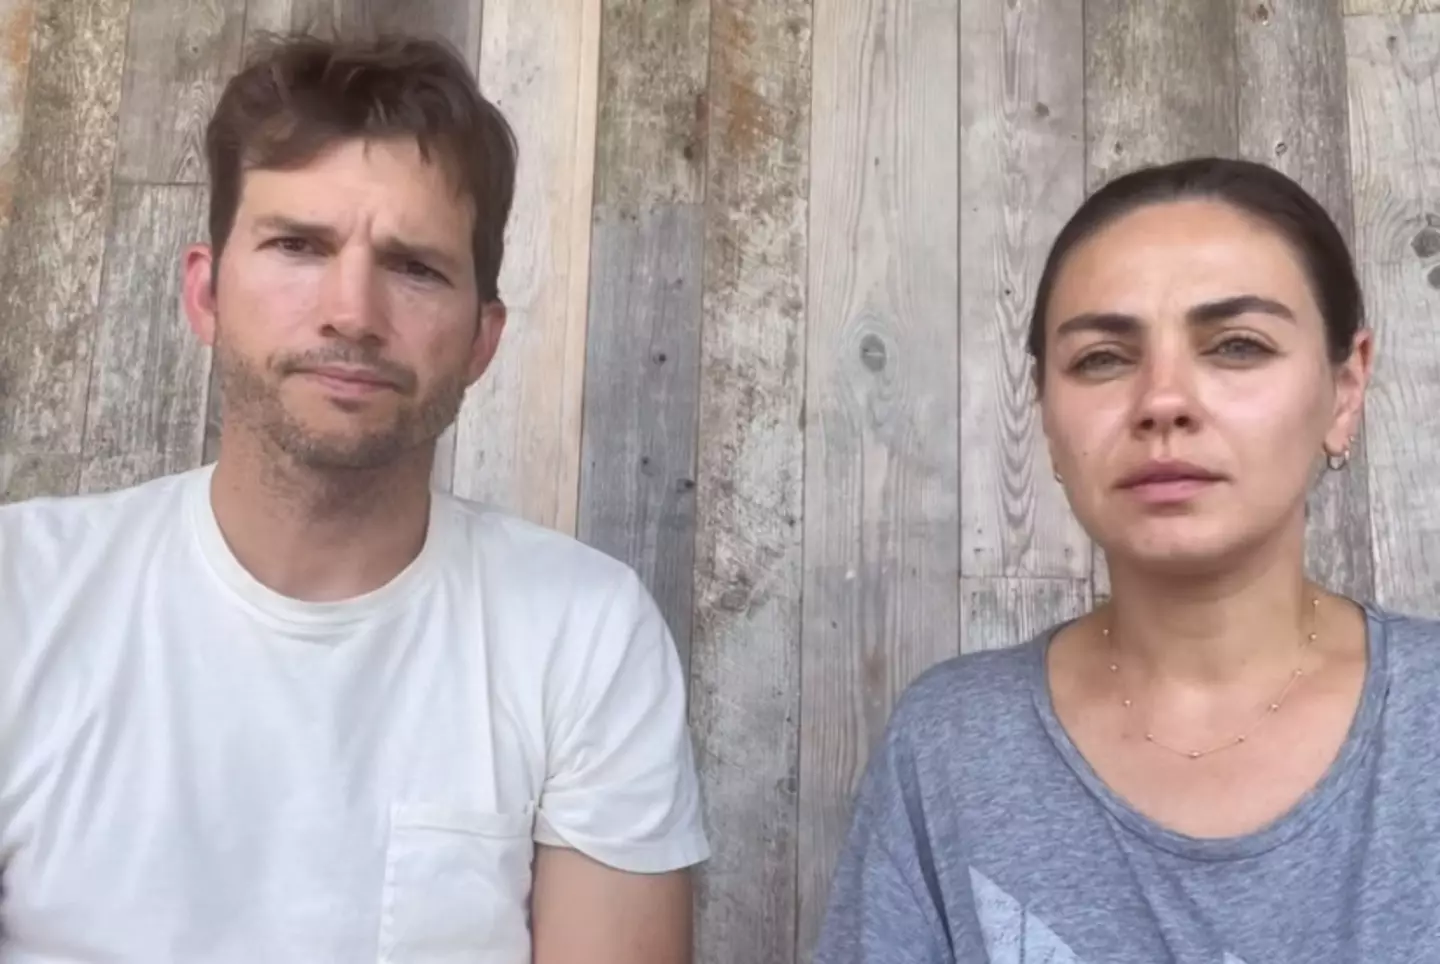 Ashton Kutcher and Mila Kunis released a video statement regarding their letters of support to Danny Masterson.